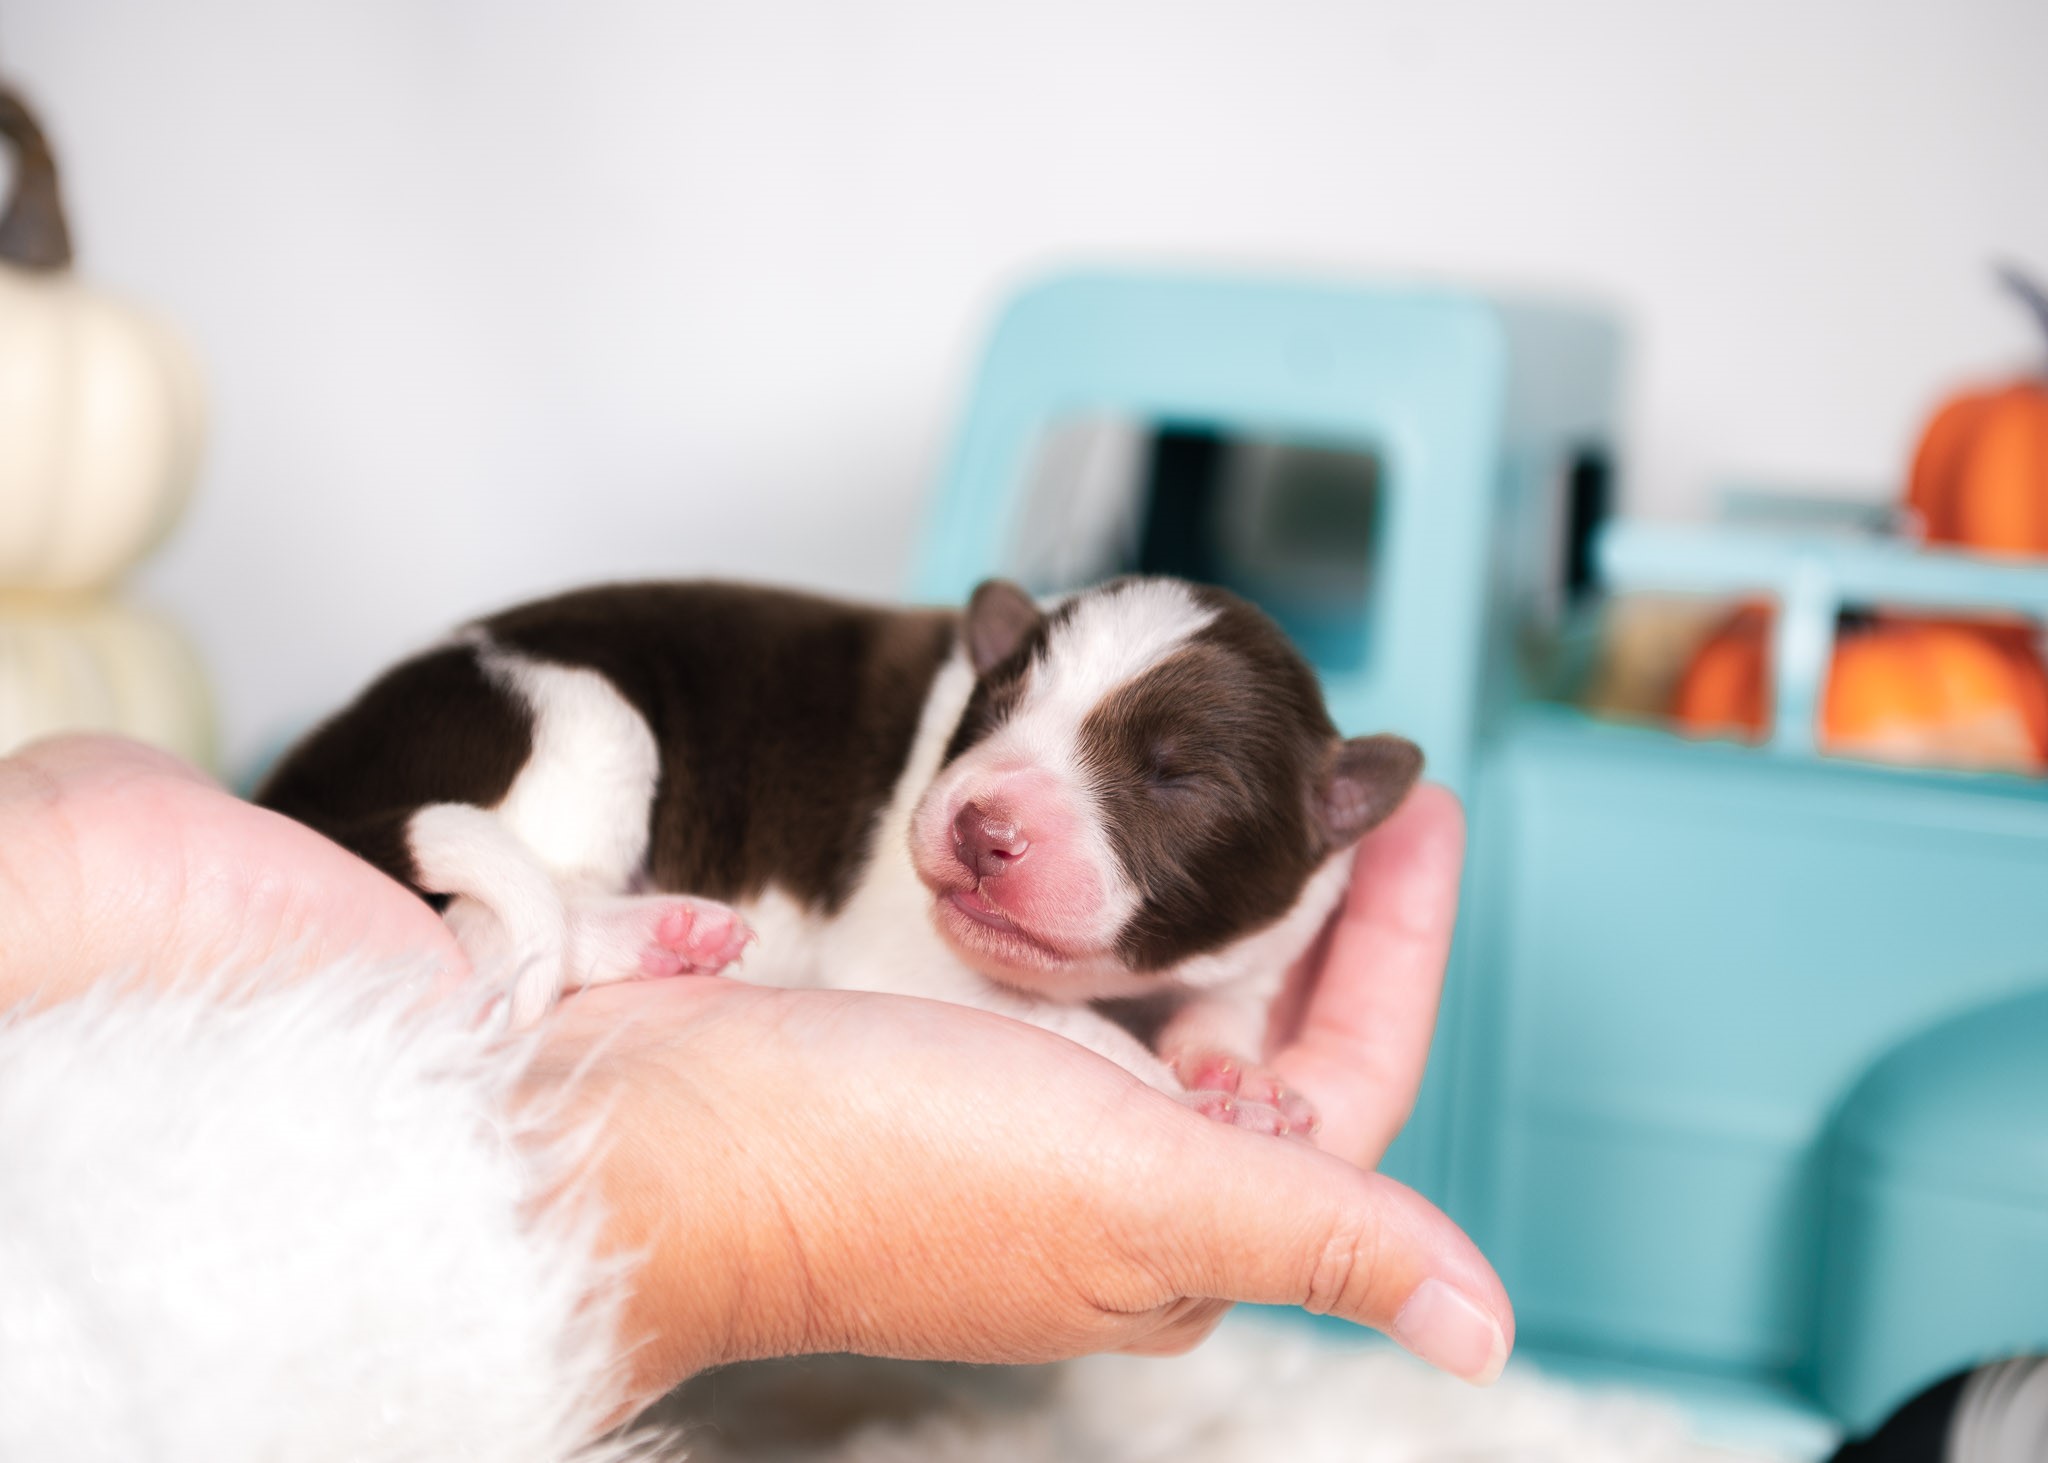 Red & White female Border Collie puppy for sale in Florida.